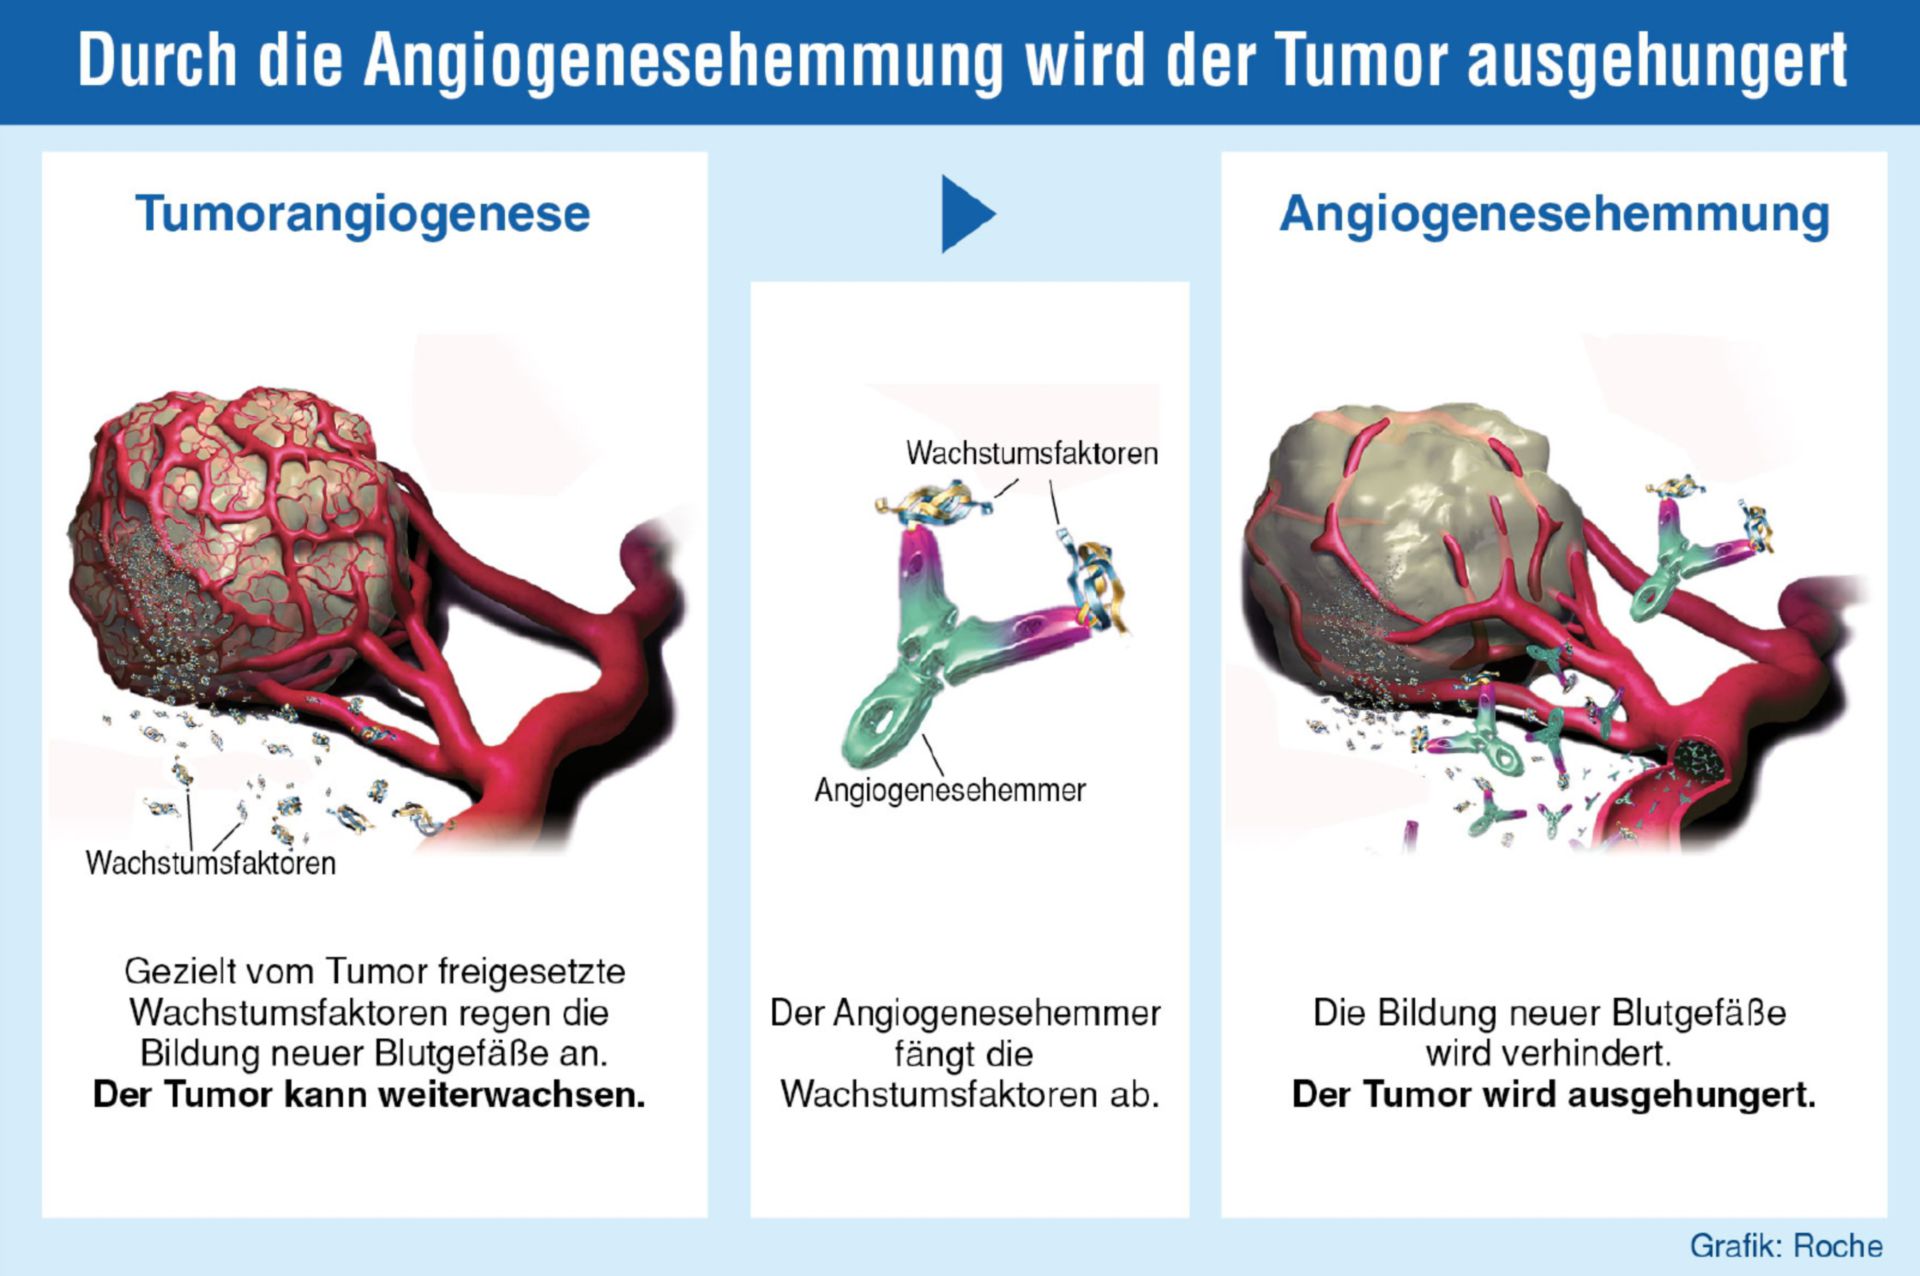 The tumor is starved by the inhibition of angiogenesis